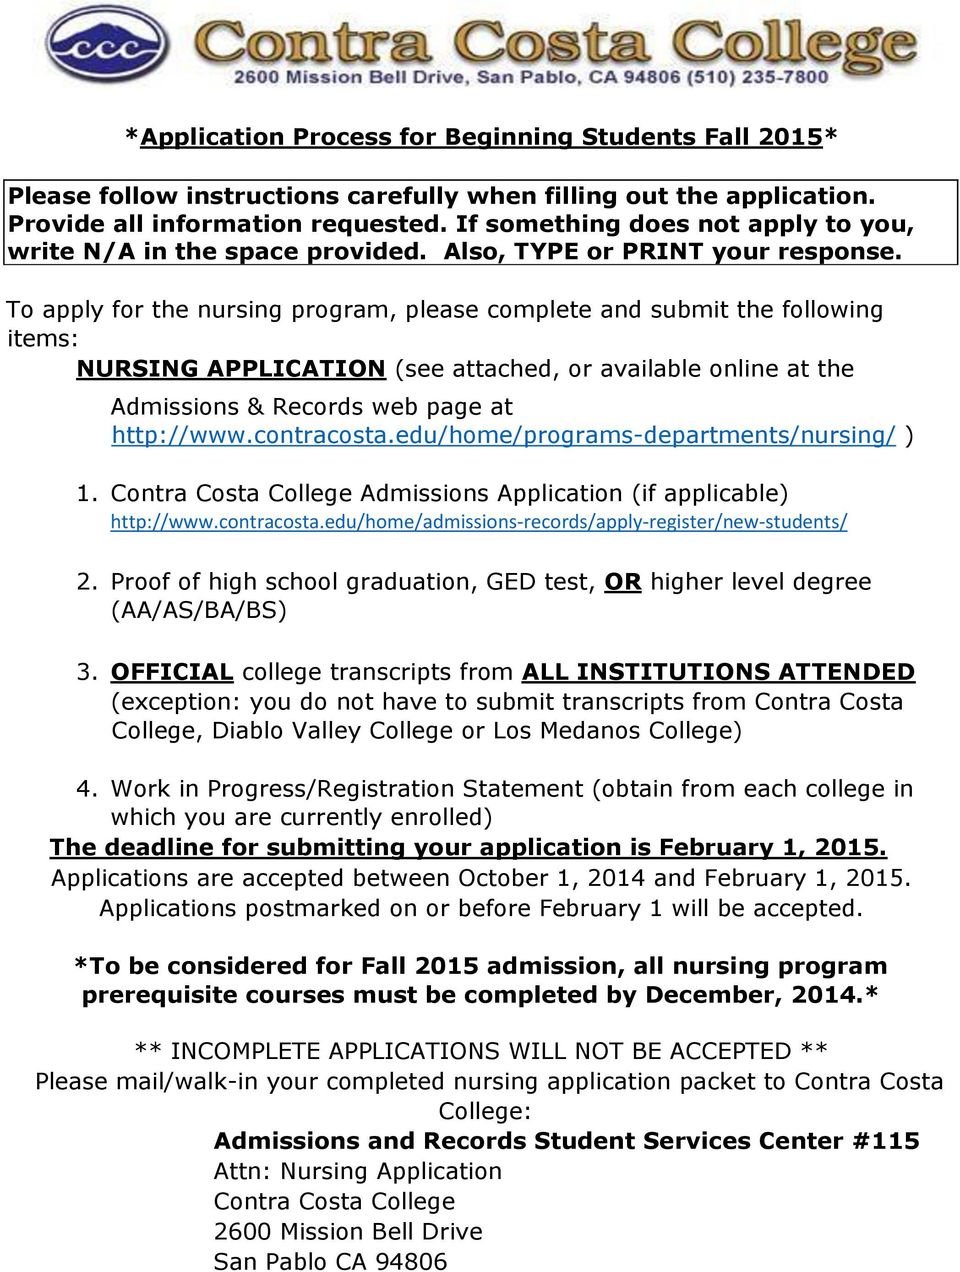 To apply for the nursing program, please complete and submit the following items: NURSING APPLICATION (see attached, or available online at the Admissions & Records web p at http://www.contracosta.